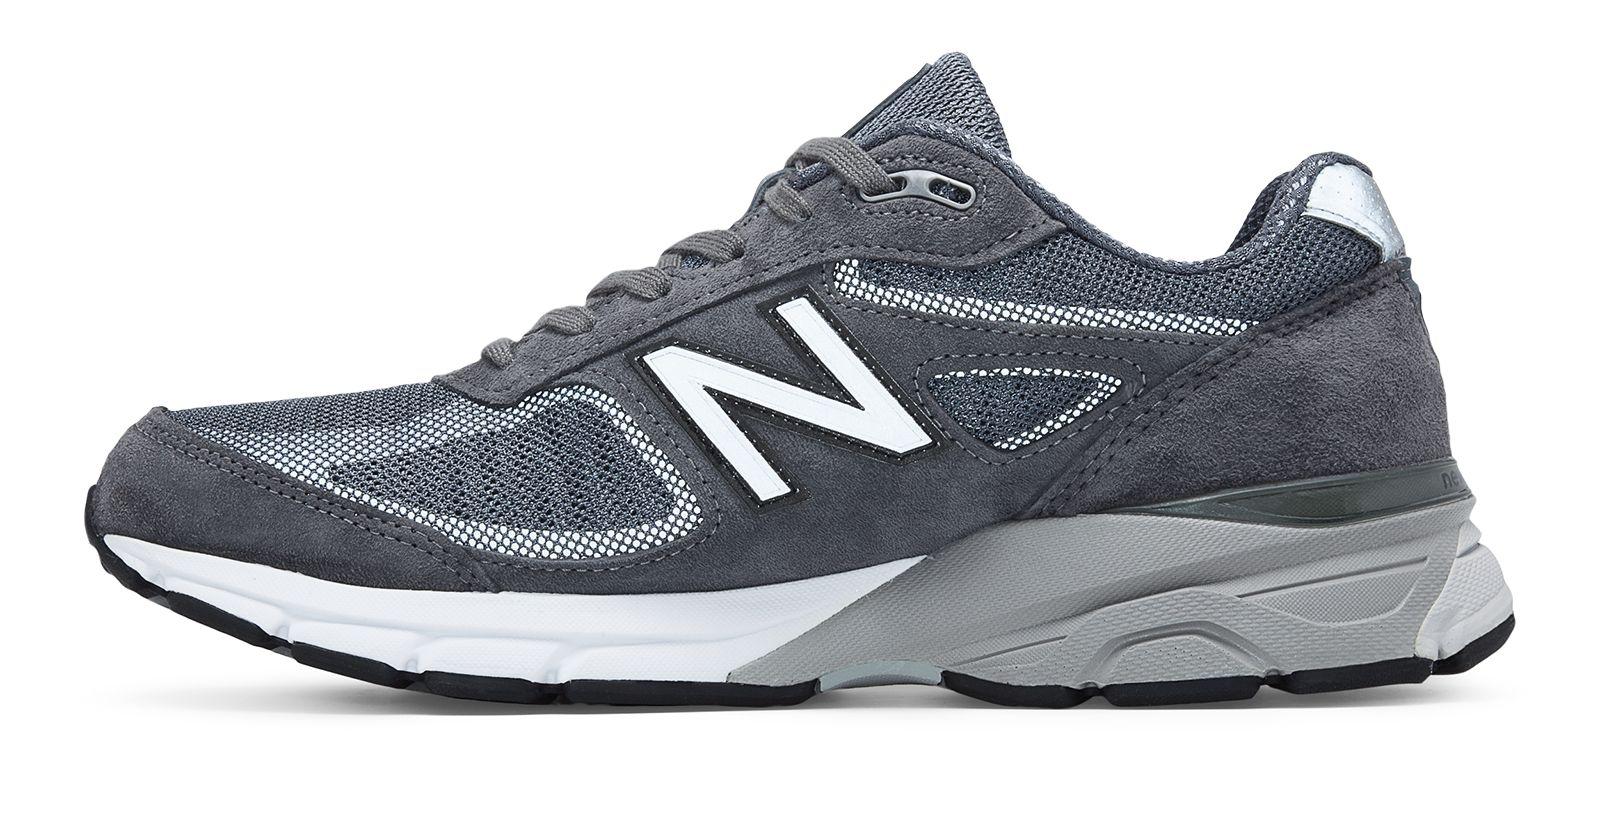 New Balance Leather Reflective 990v4 in Dark Grey (Gray) for Men - Lyst